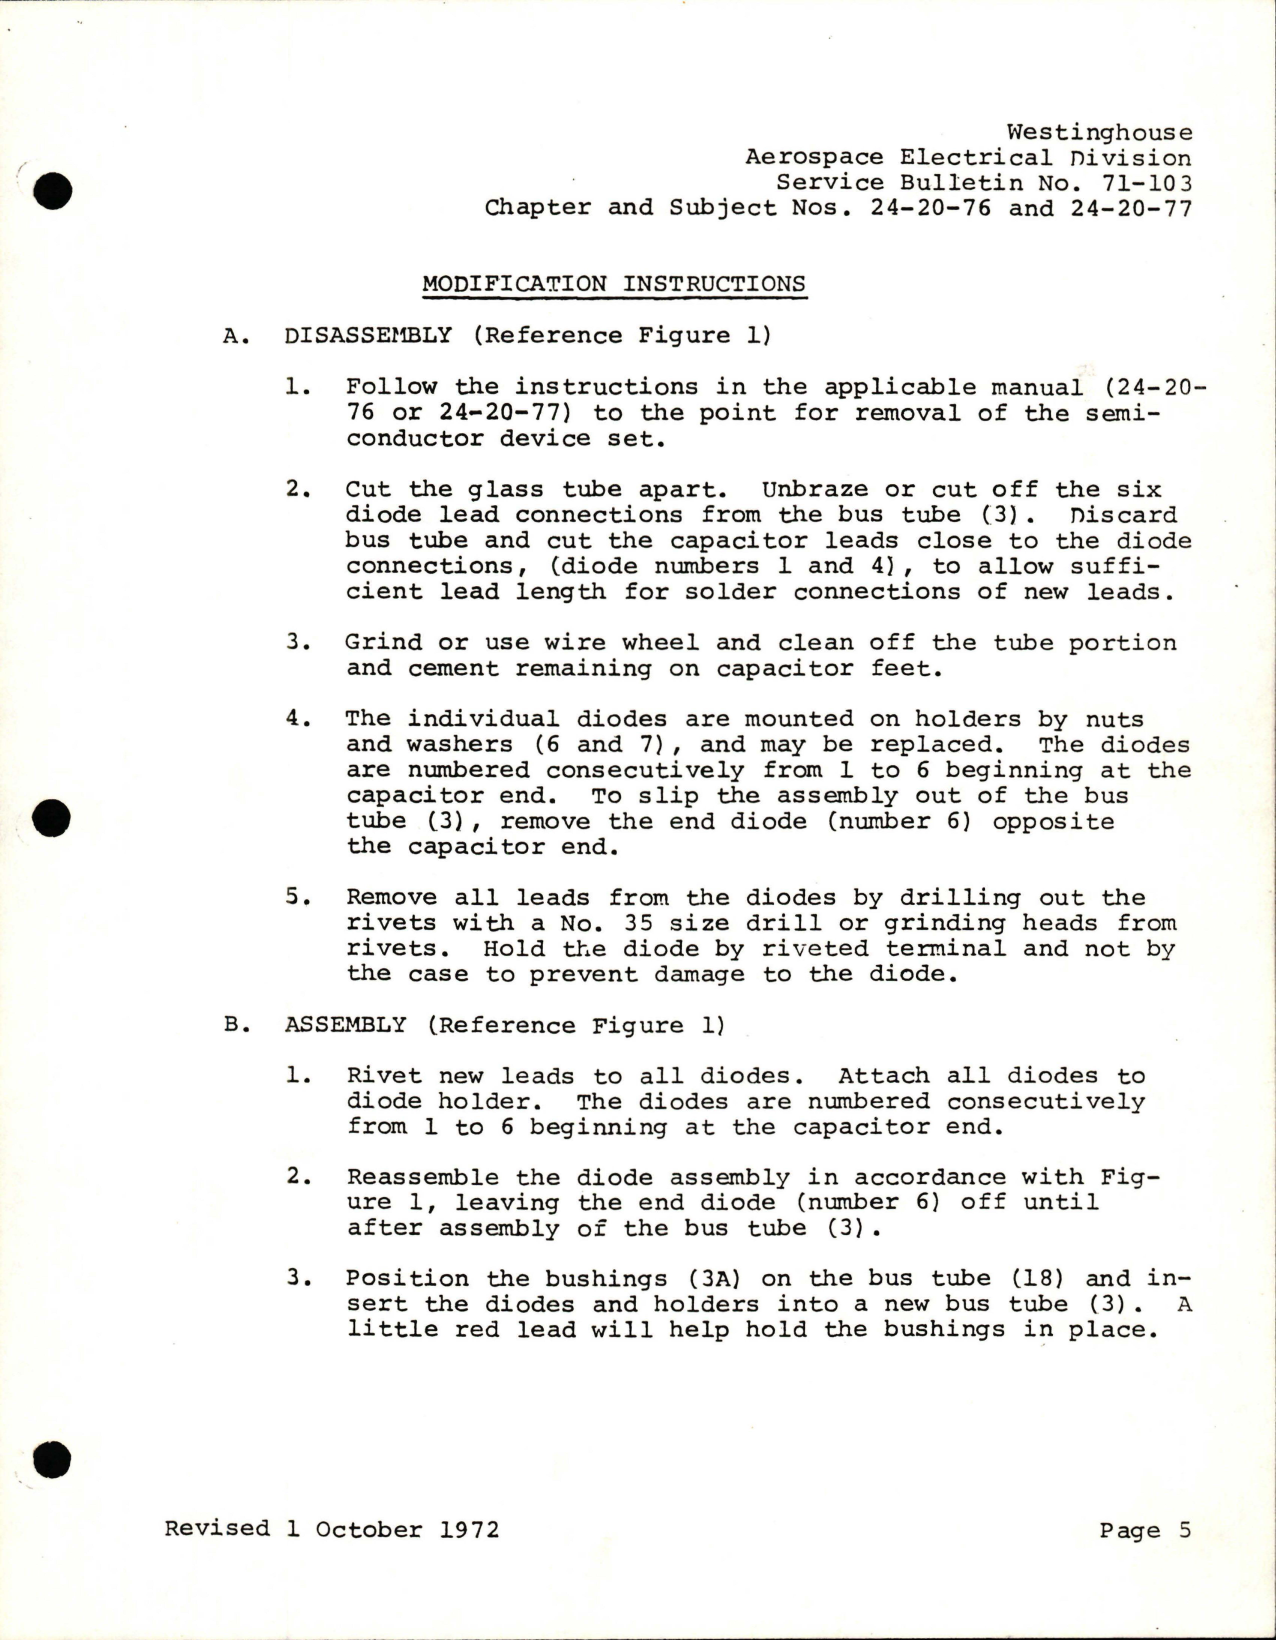 Sample page 5 from AirCorps Library document: Introduction of Improved Semiconductor Device Set 